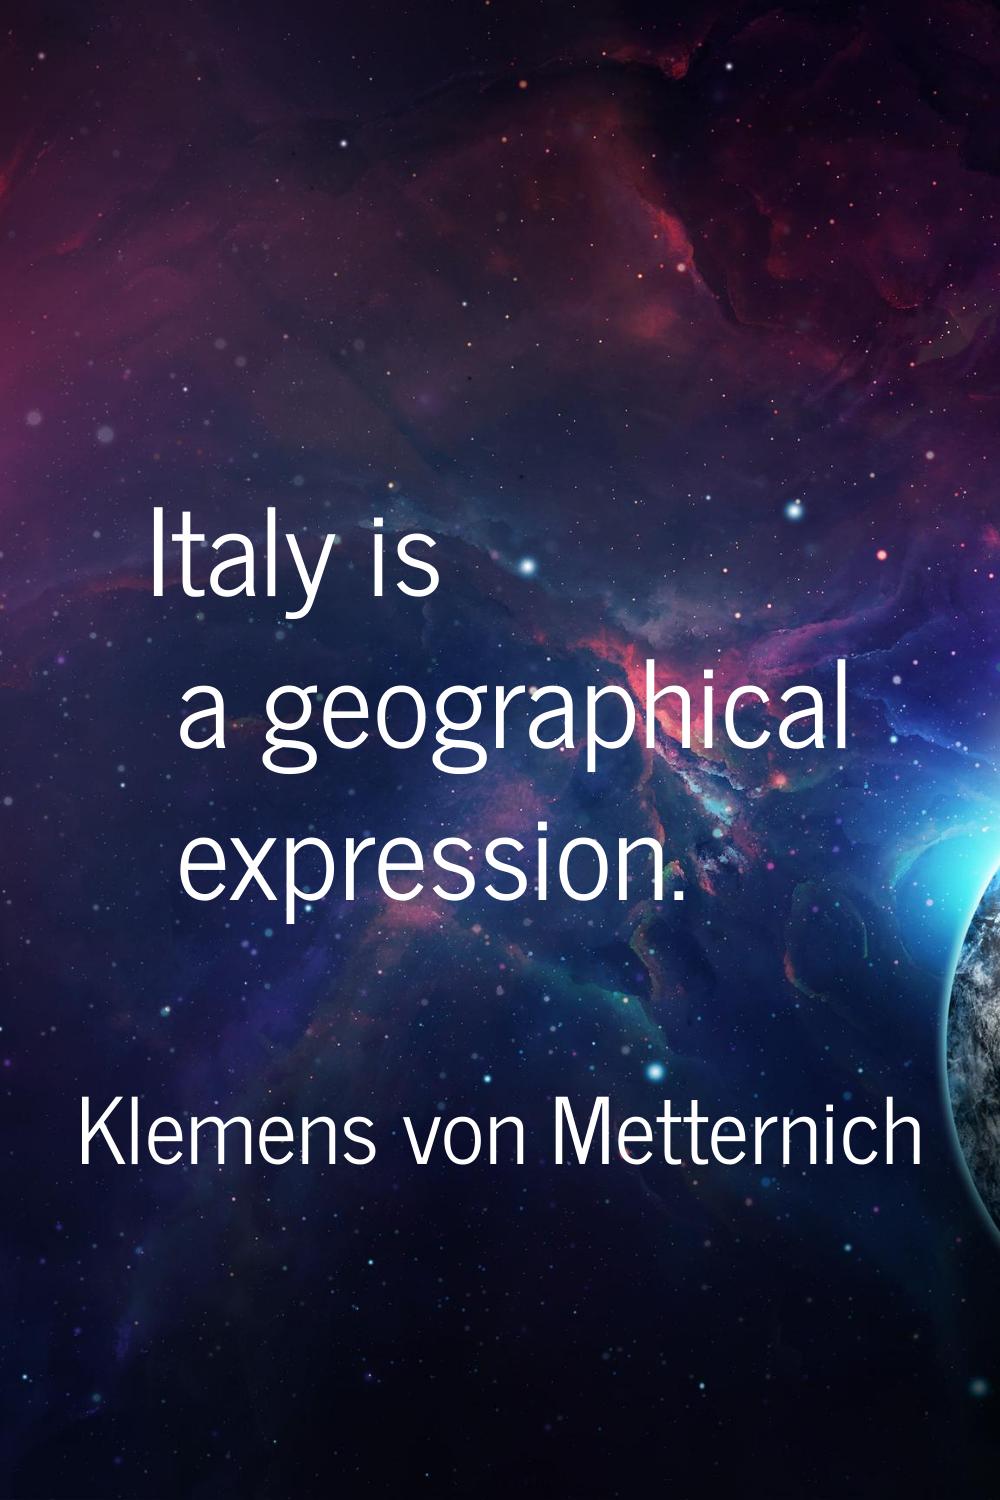 Italy is a geographical expression.